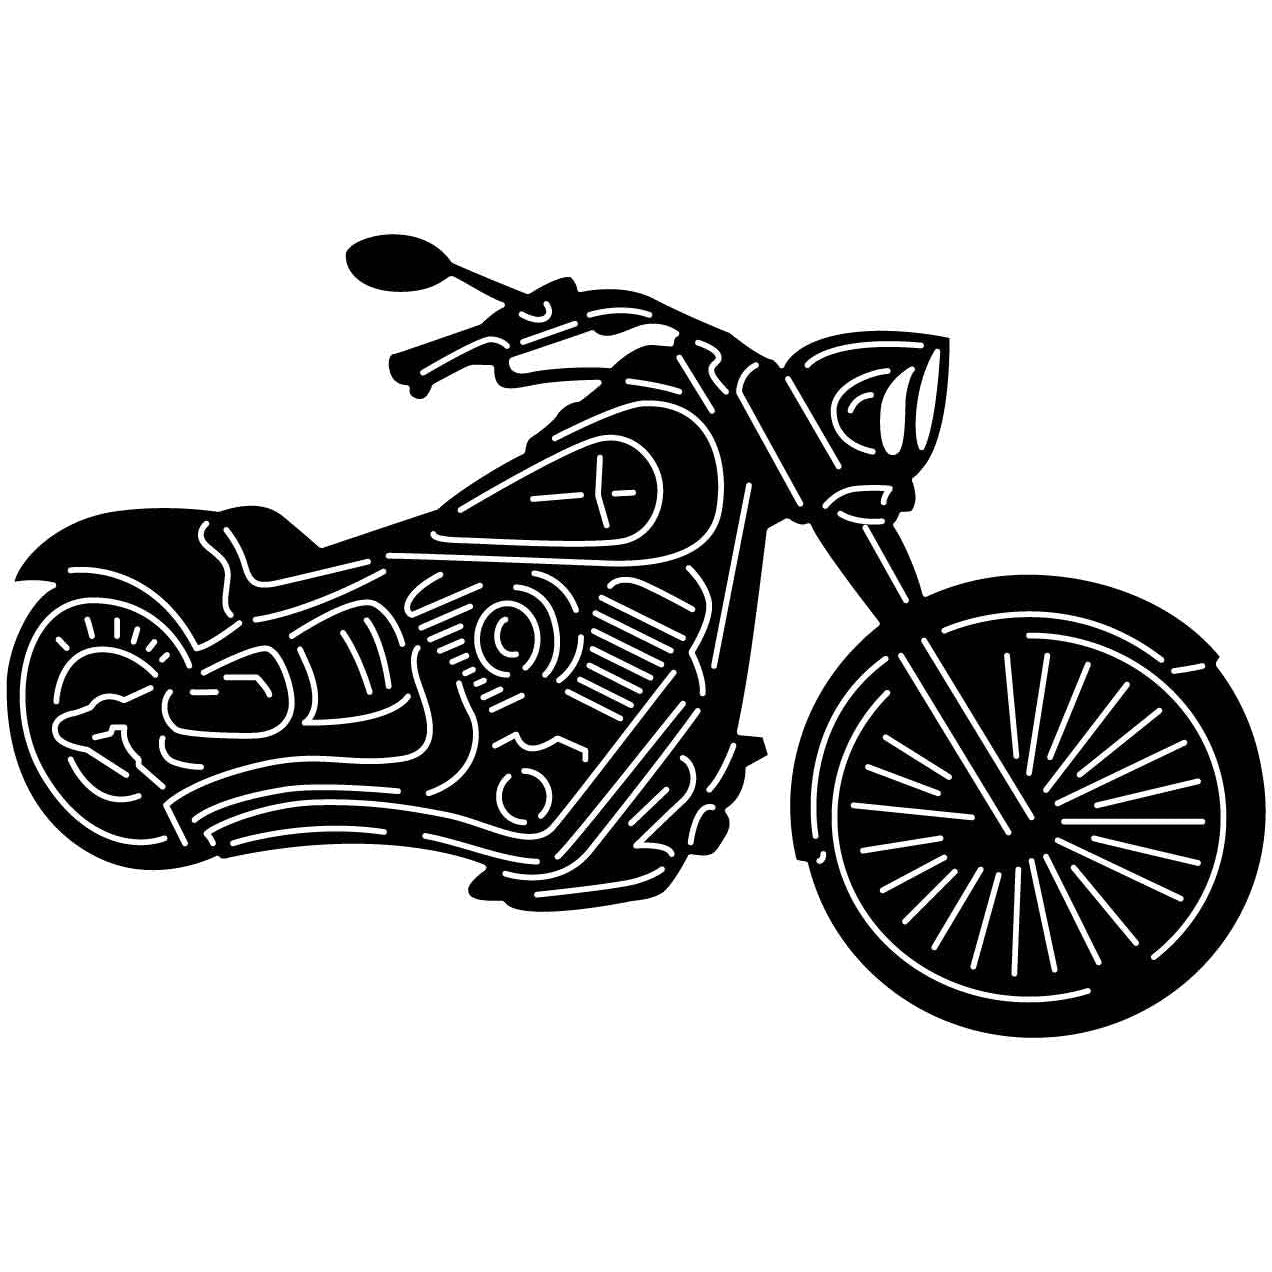 Motorcycle-dxf files cut ready for cnc machines-dxfforcnc.com